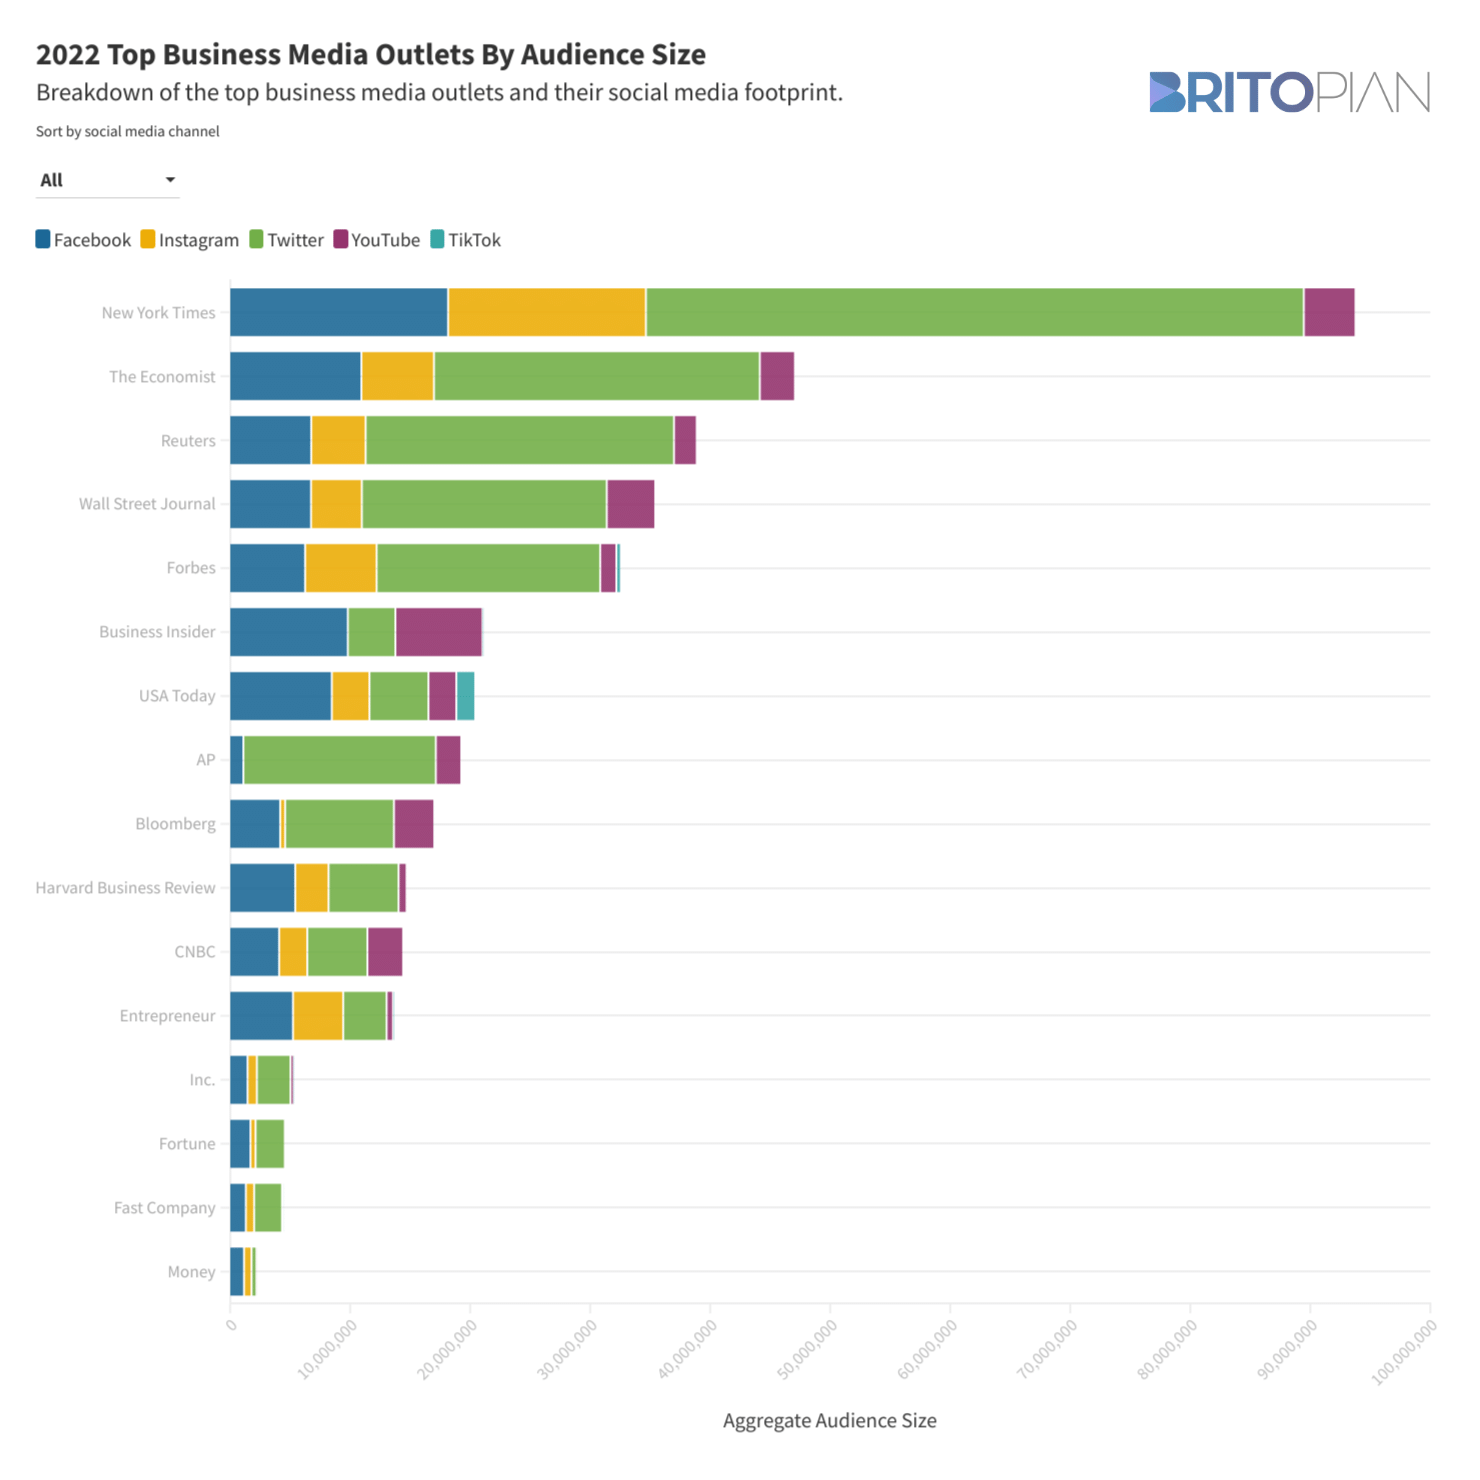 Top Business Media by Audience Size in 2022